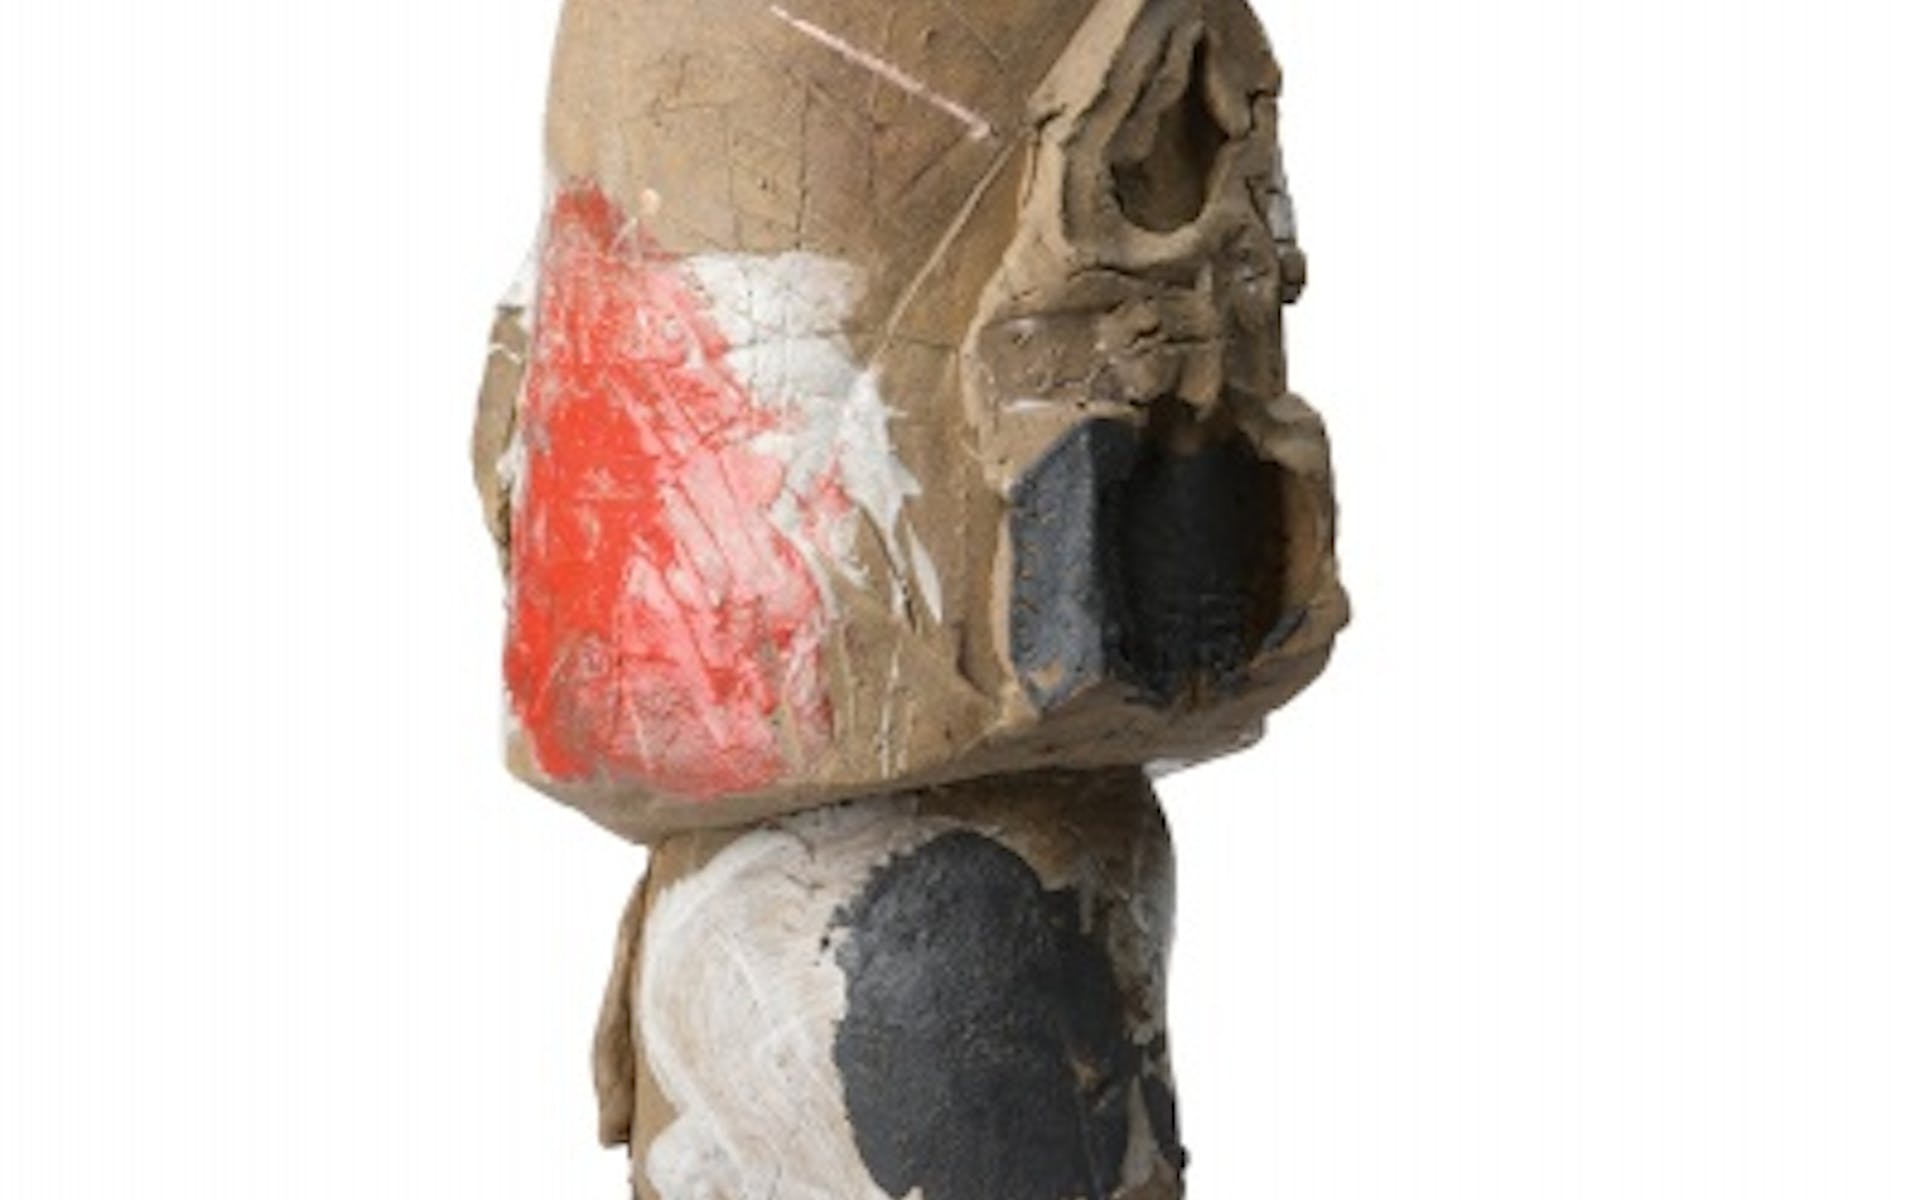 Peter Voulkos, Red River, c. 1960